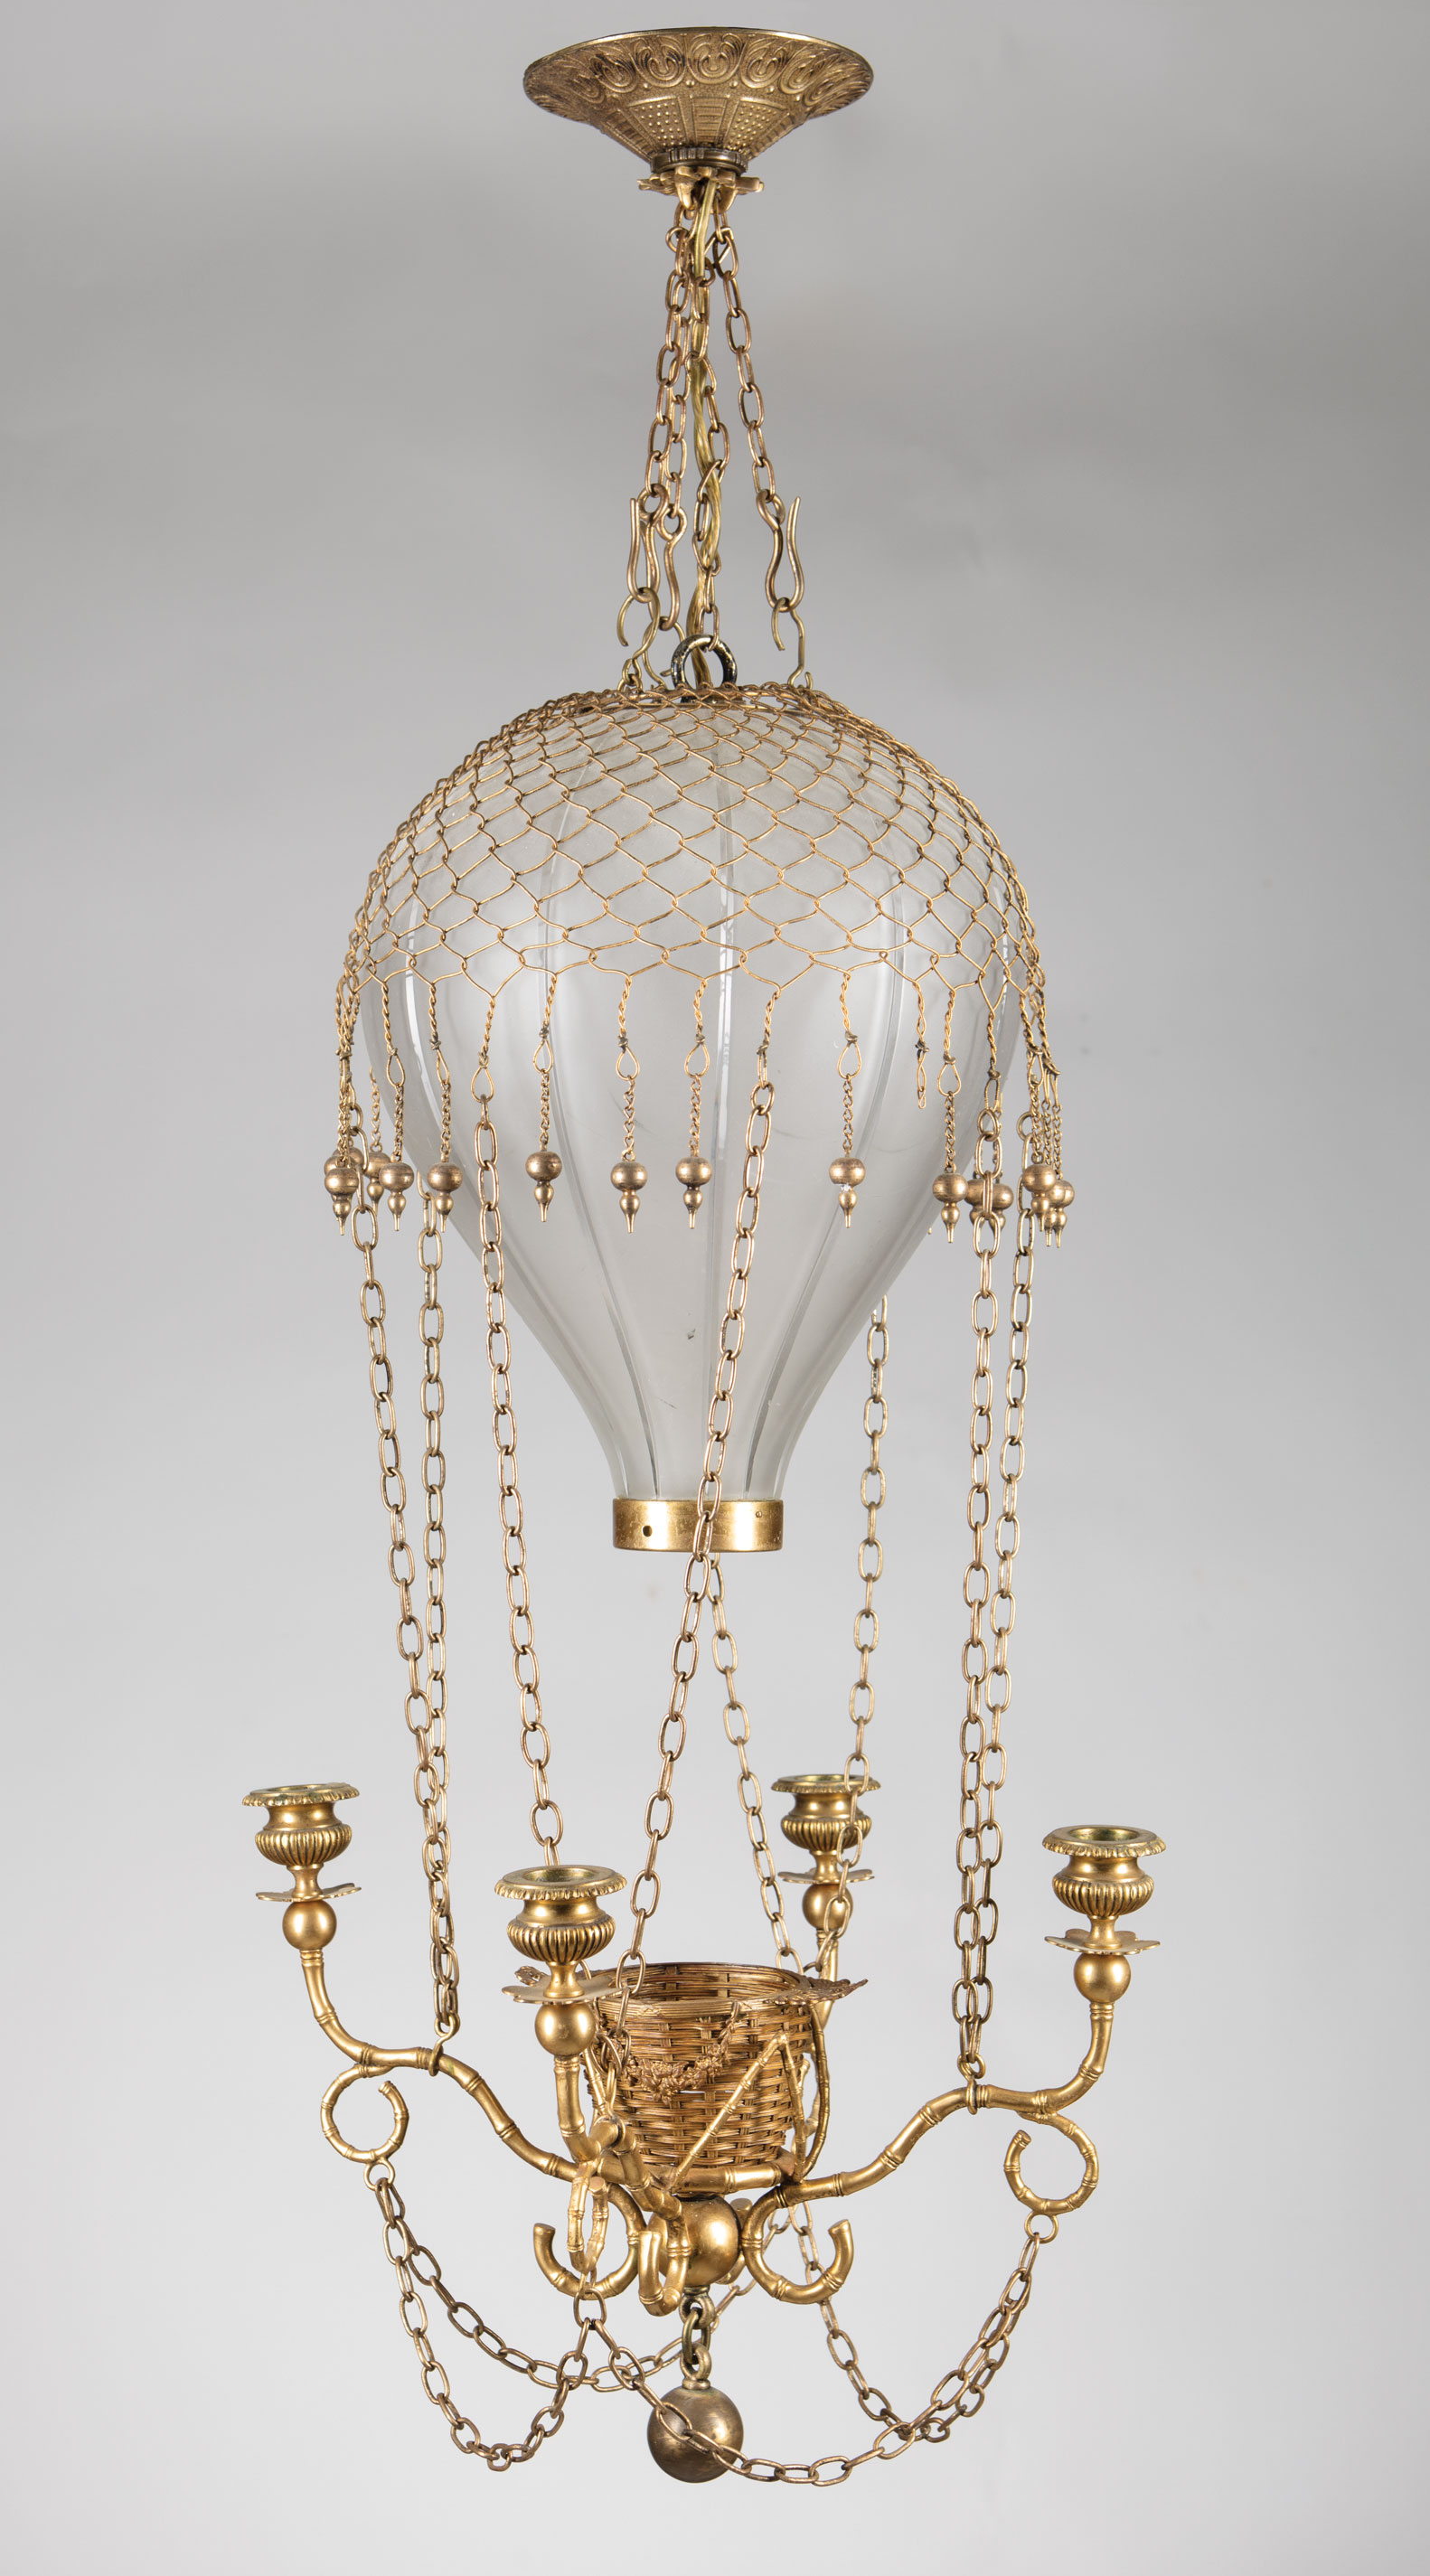 French Gilt Bronze and Etched Glass "Montgolfier" Hall Lamp , c. 1900, hot-air balloon shade,